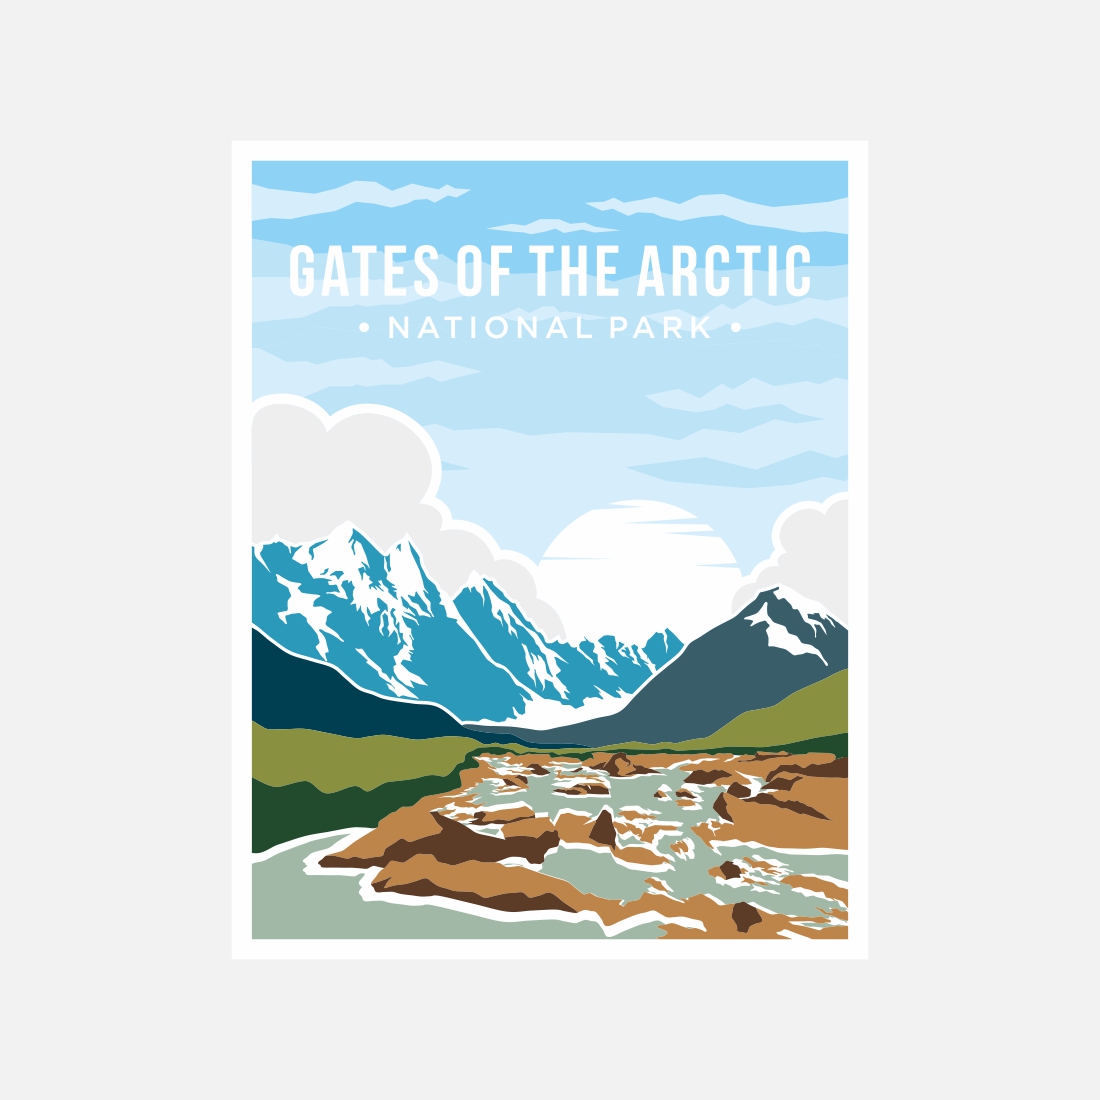 Gate of the arctic National Park poster vector illustration design – Only $8 preview image.